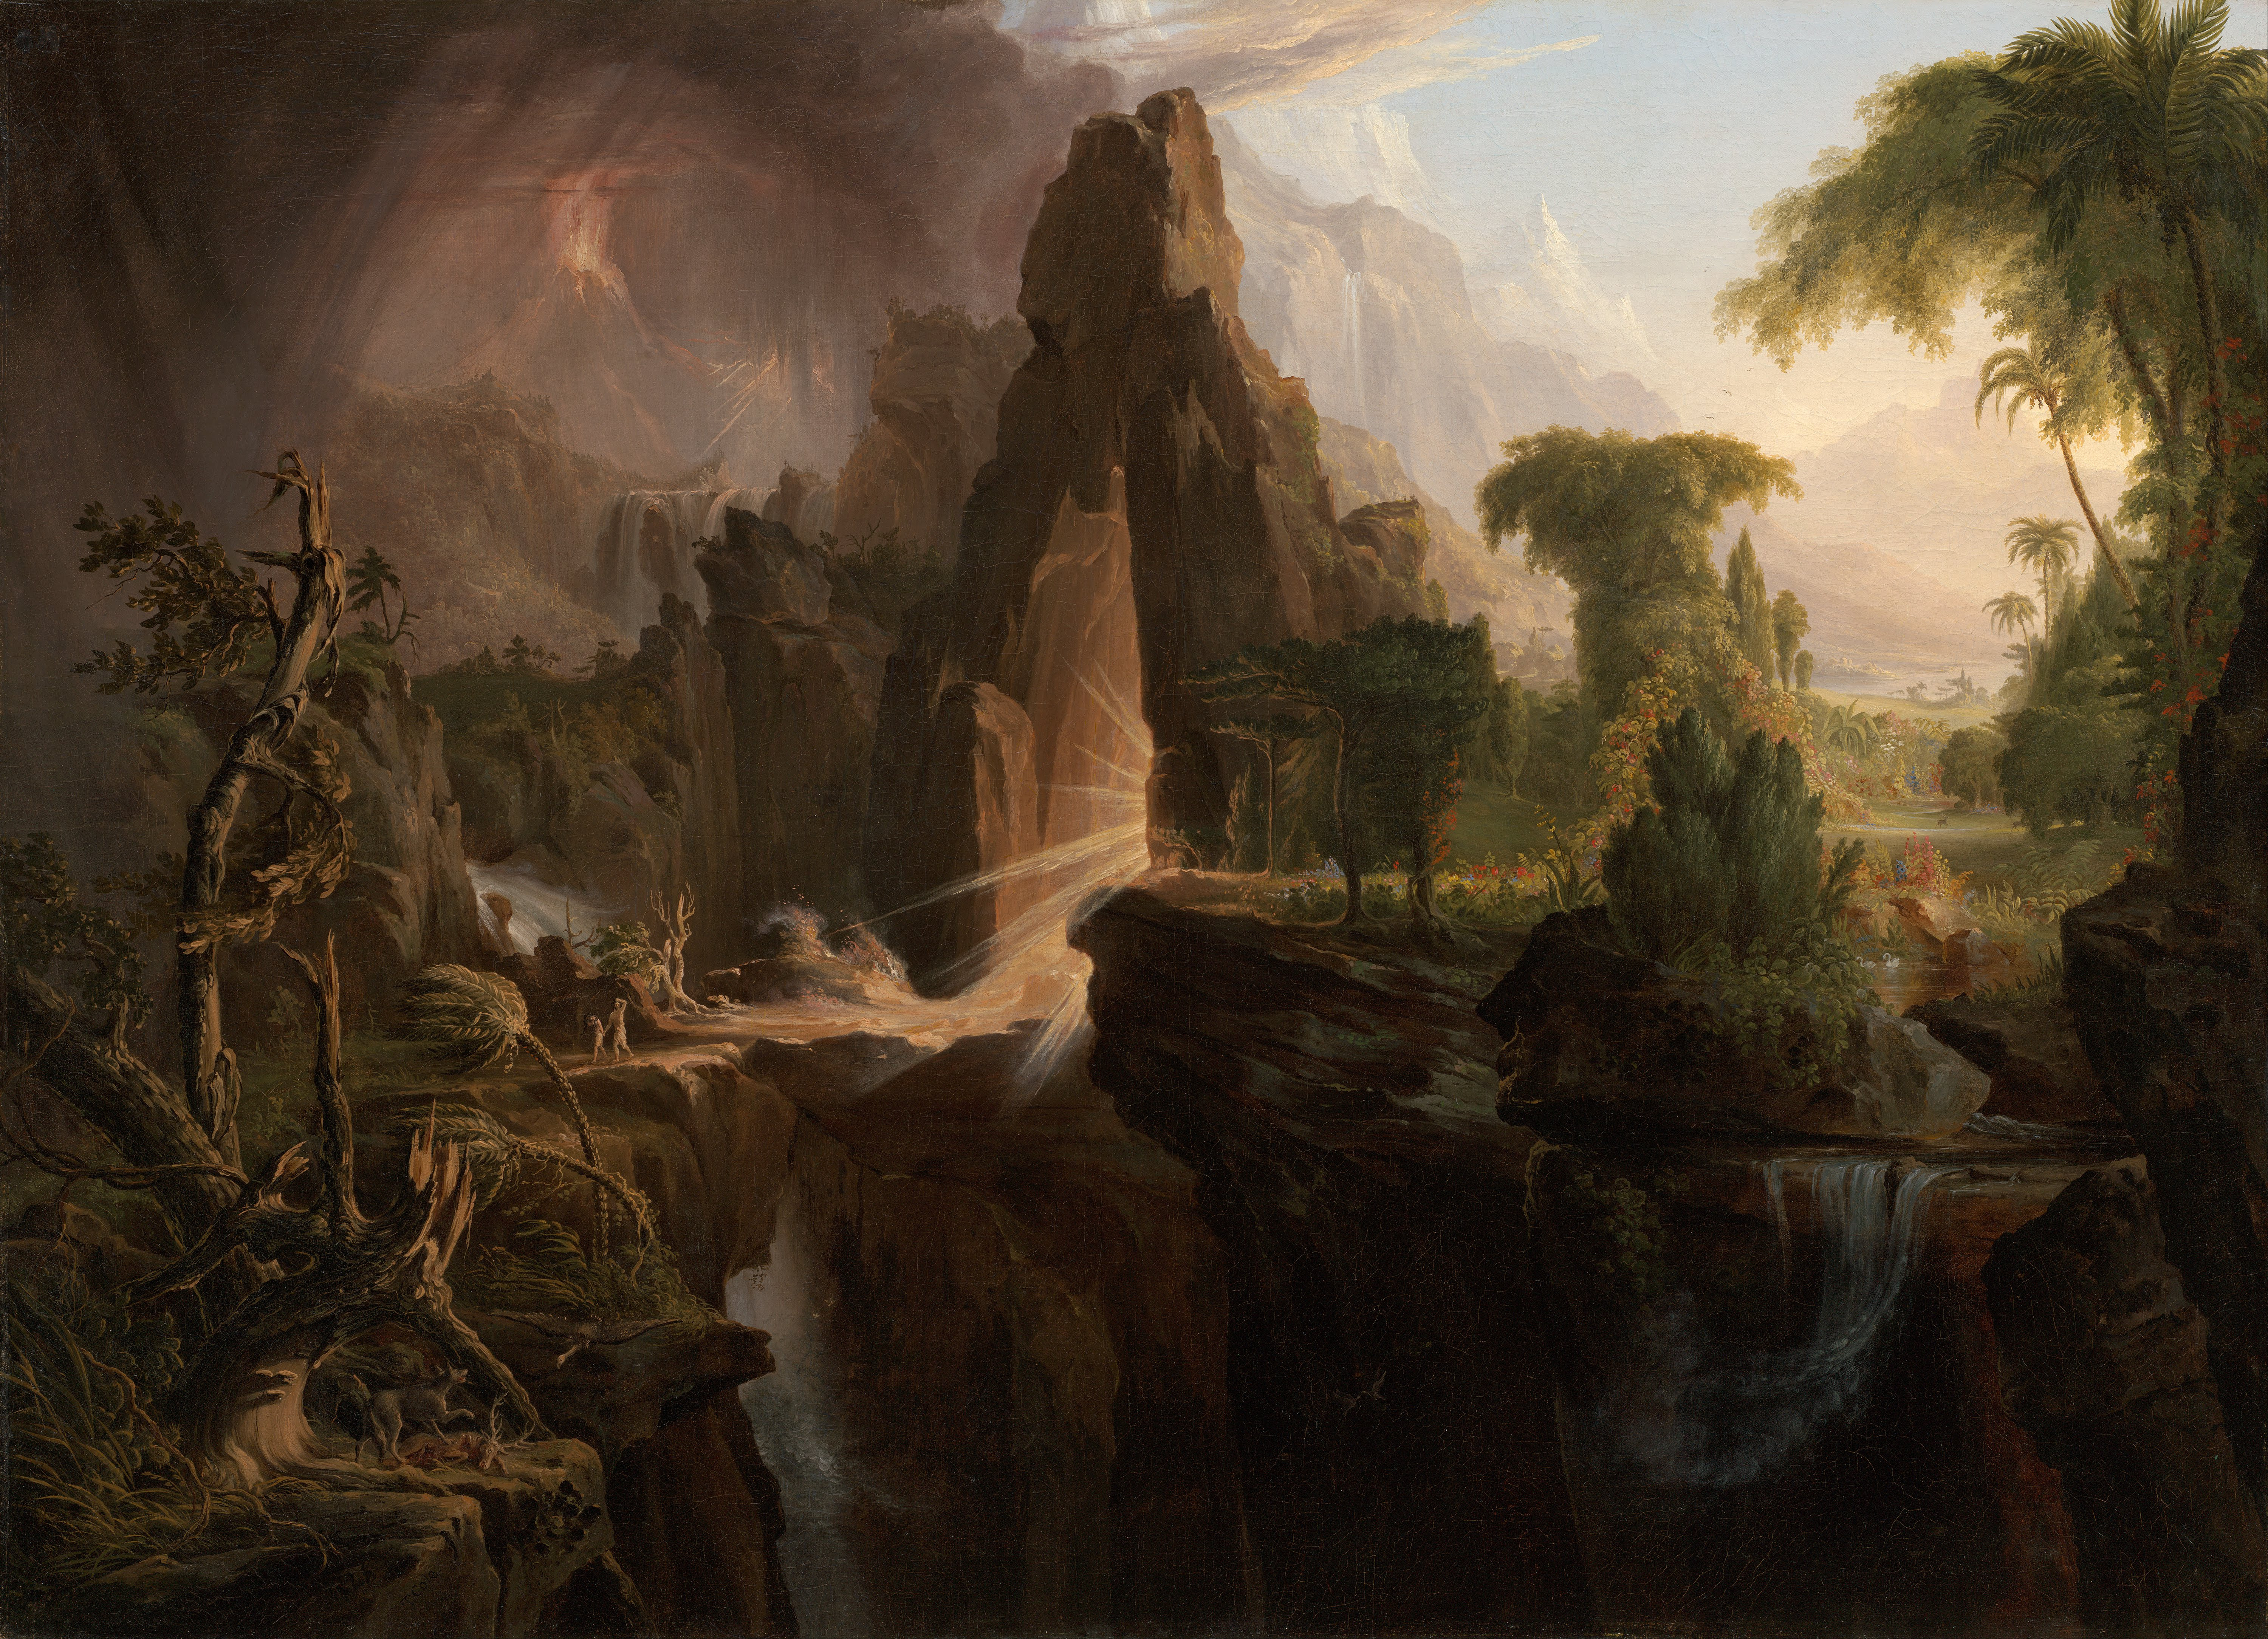 http://upload.wikimedia.org/wikipedia/commons/c/c3/Thomas_Cole_-_Expulsion_from_the_Garden_of_Eden_-_Google_Art_Project.jpg